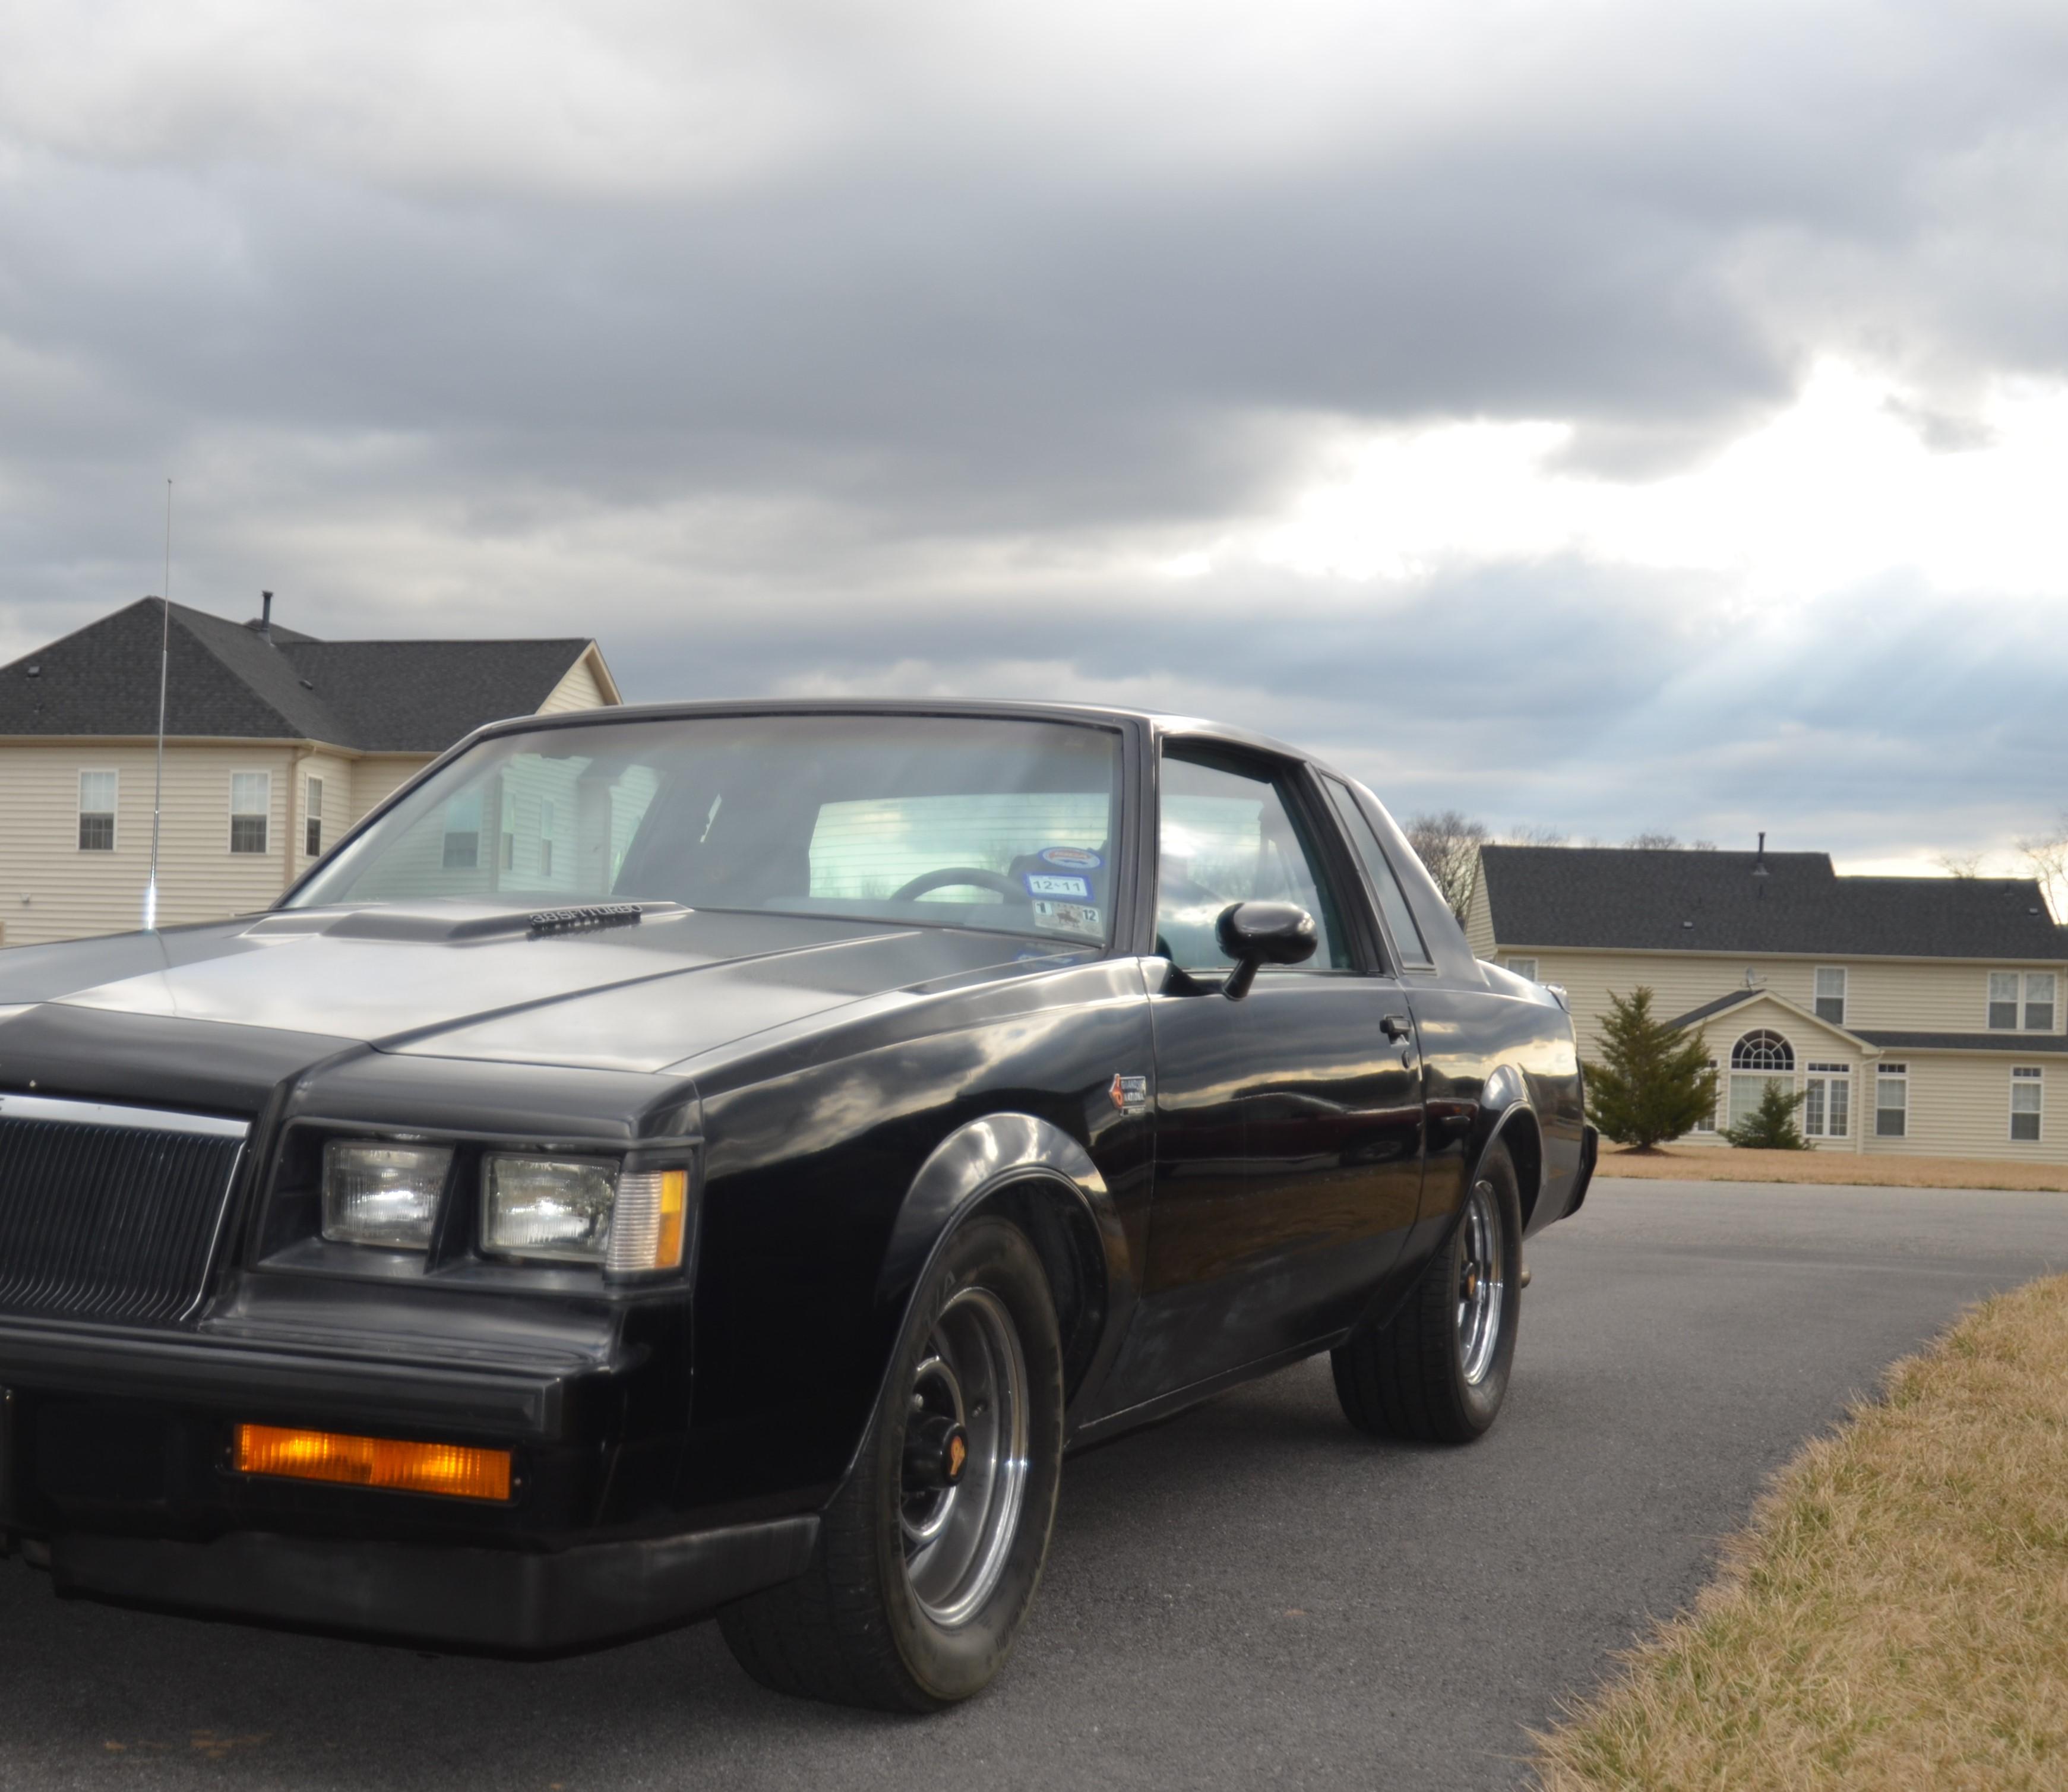 1986 Buick Grand National Regal Coupe.This is 1986 Buick Grand National in